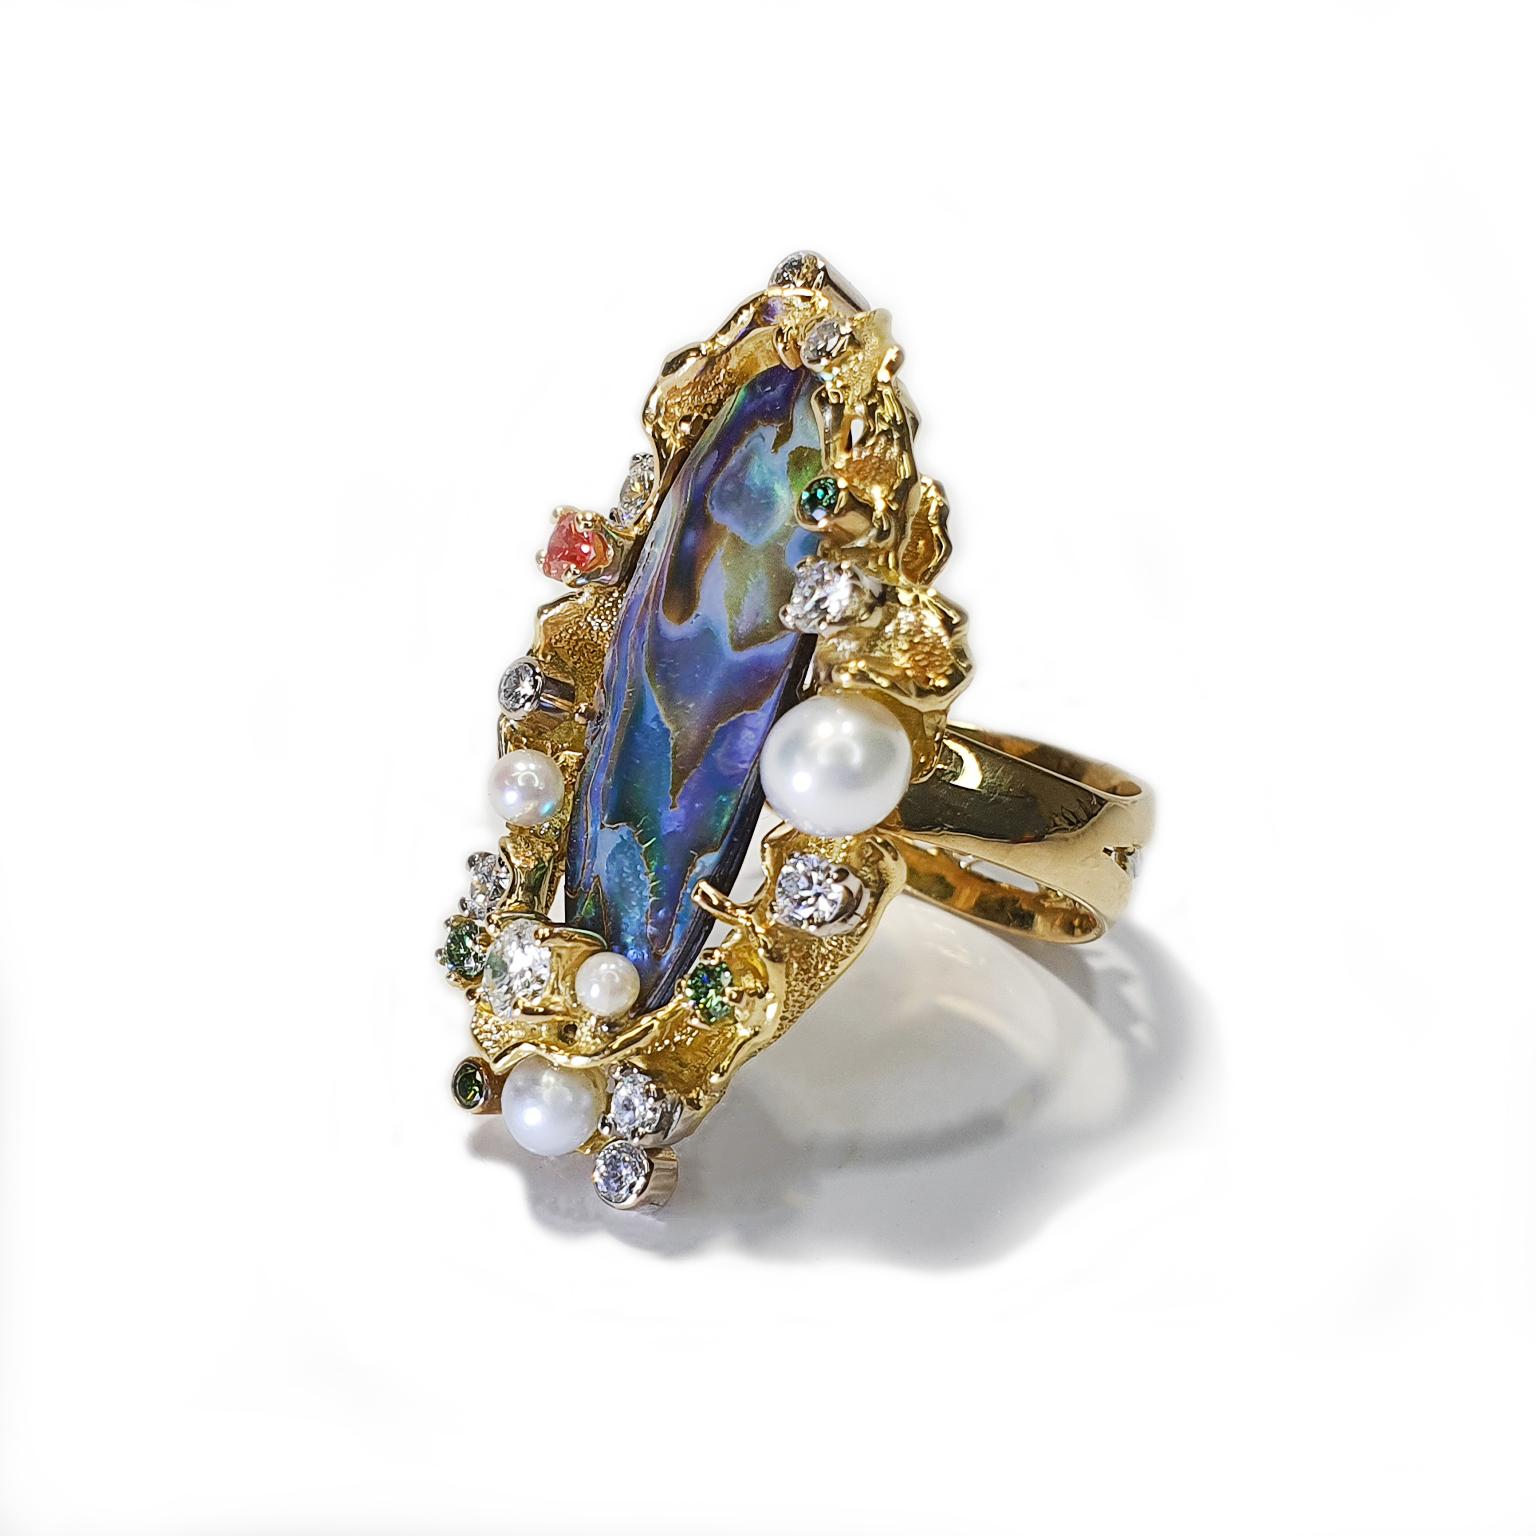 The “Pacific Opals” ring was designed and hand crafted by multi award-winning jeweller Paul Amey in Australia. Stamped with his registered makers mark and precious metal marks, “Pacific Opals” ring was designed and completed with over 22 hours of